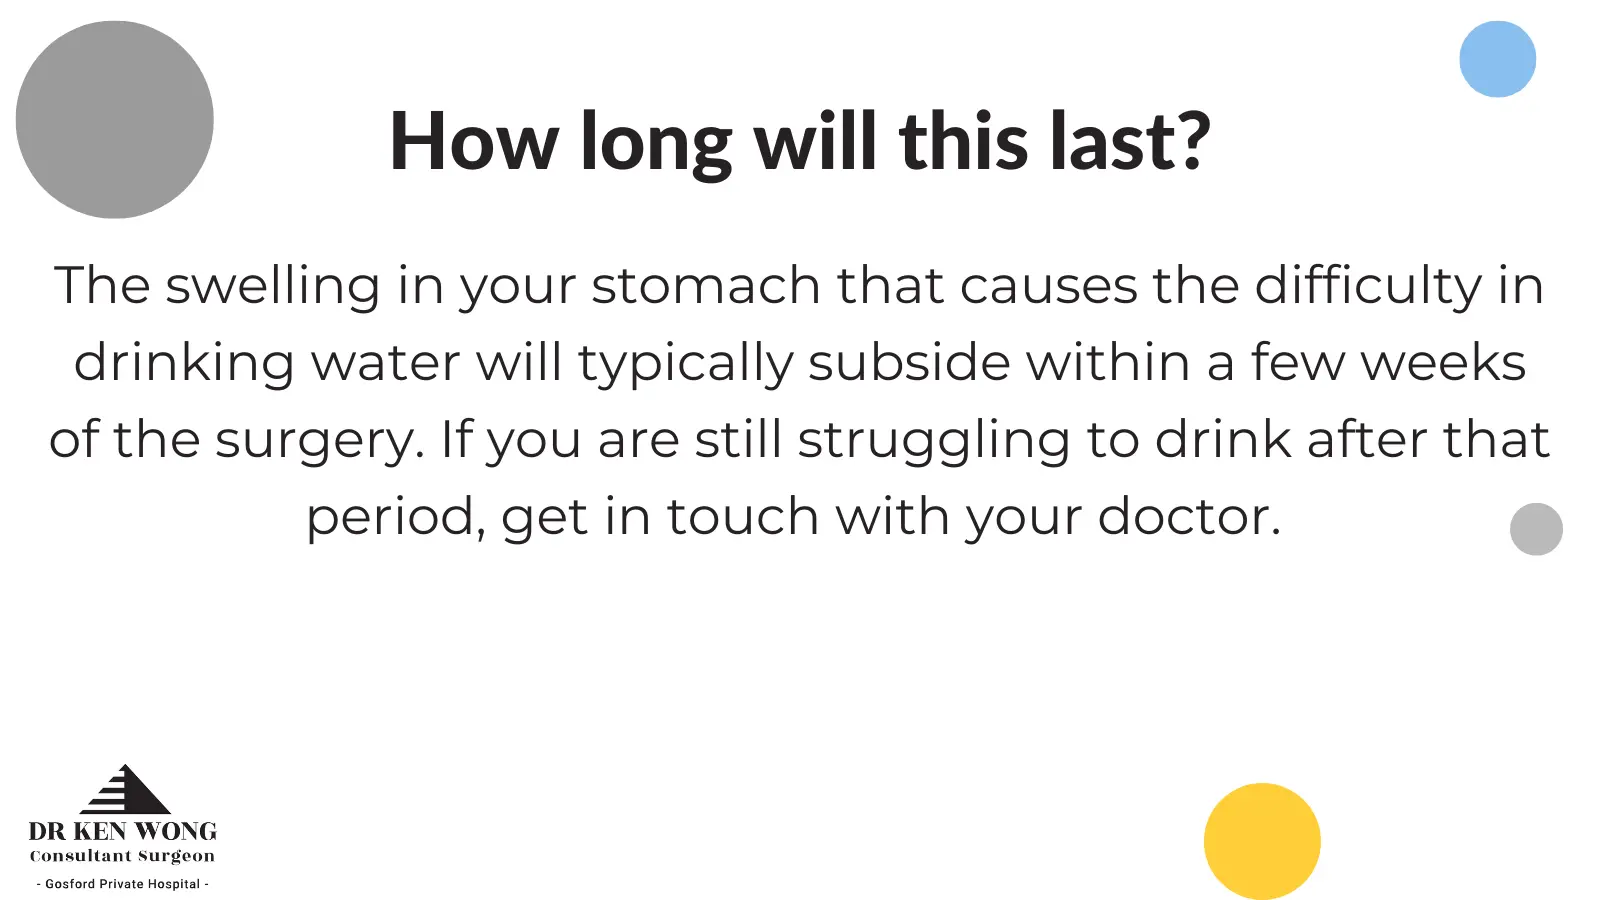 it is normal to struggle with drinking water after surgery, and you can expect it to last for a few weeks